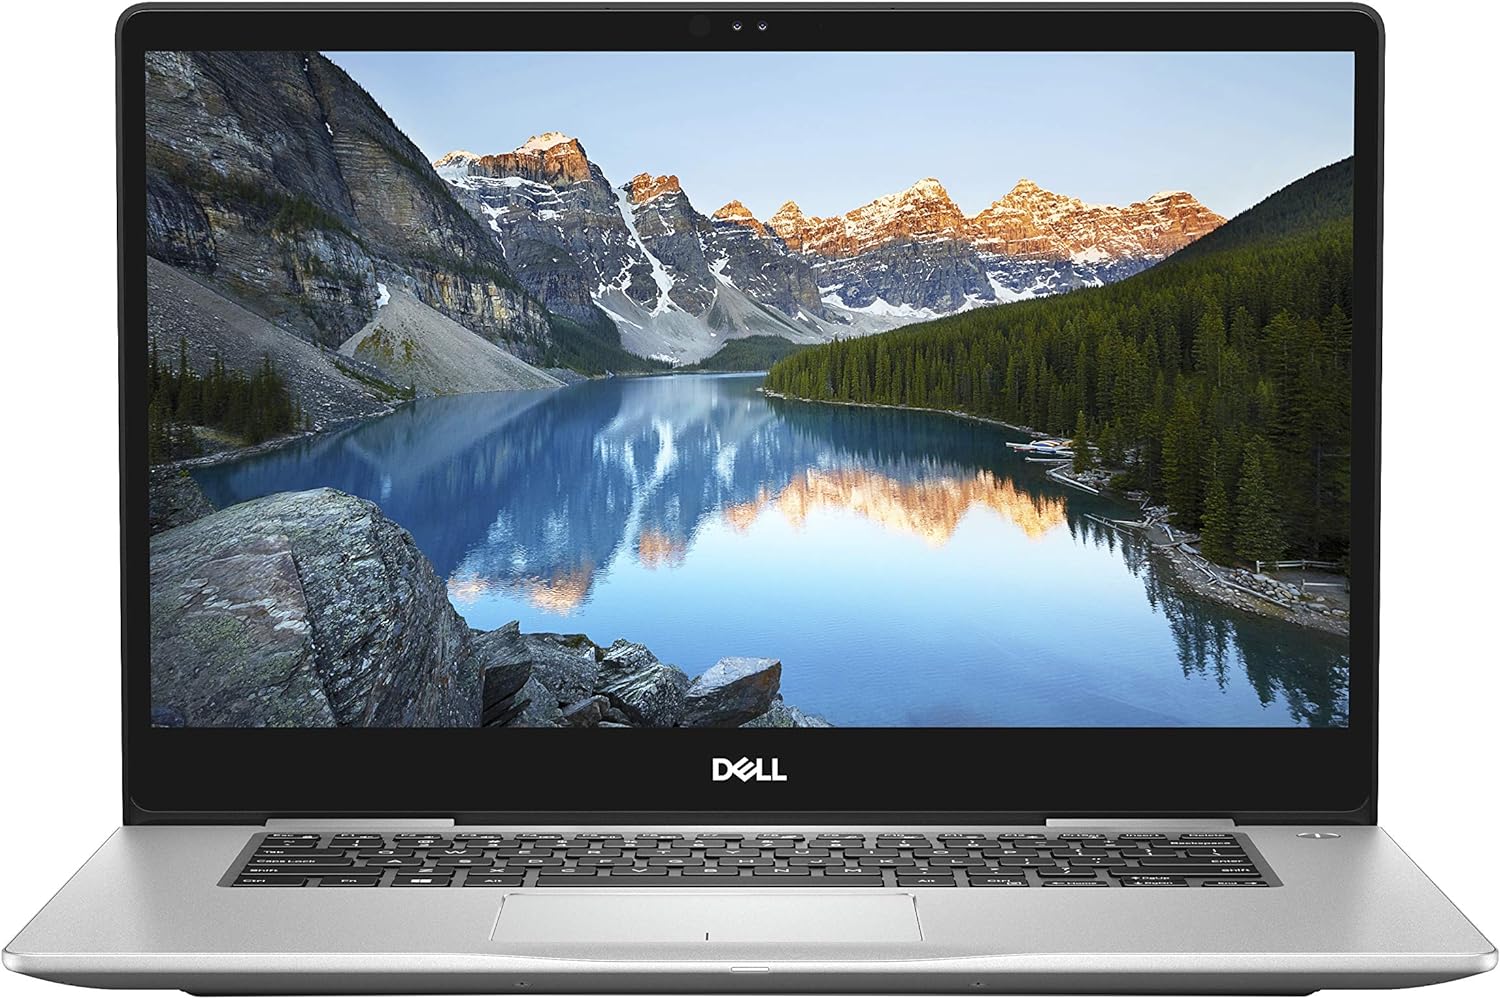 Frenzy Take a risk Egoism T954772972068A Dell Inspiron 15 7000 Laptop: Core i7-8550U, 512GB SSD, 16GB  RAM, 15.6-inch 4K UHD Touch Display, 940MX 4GB Graphics